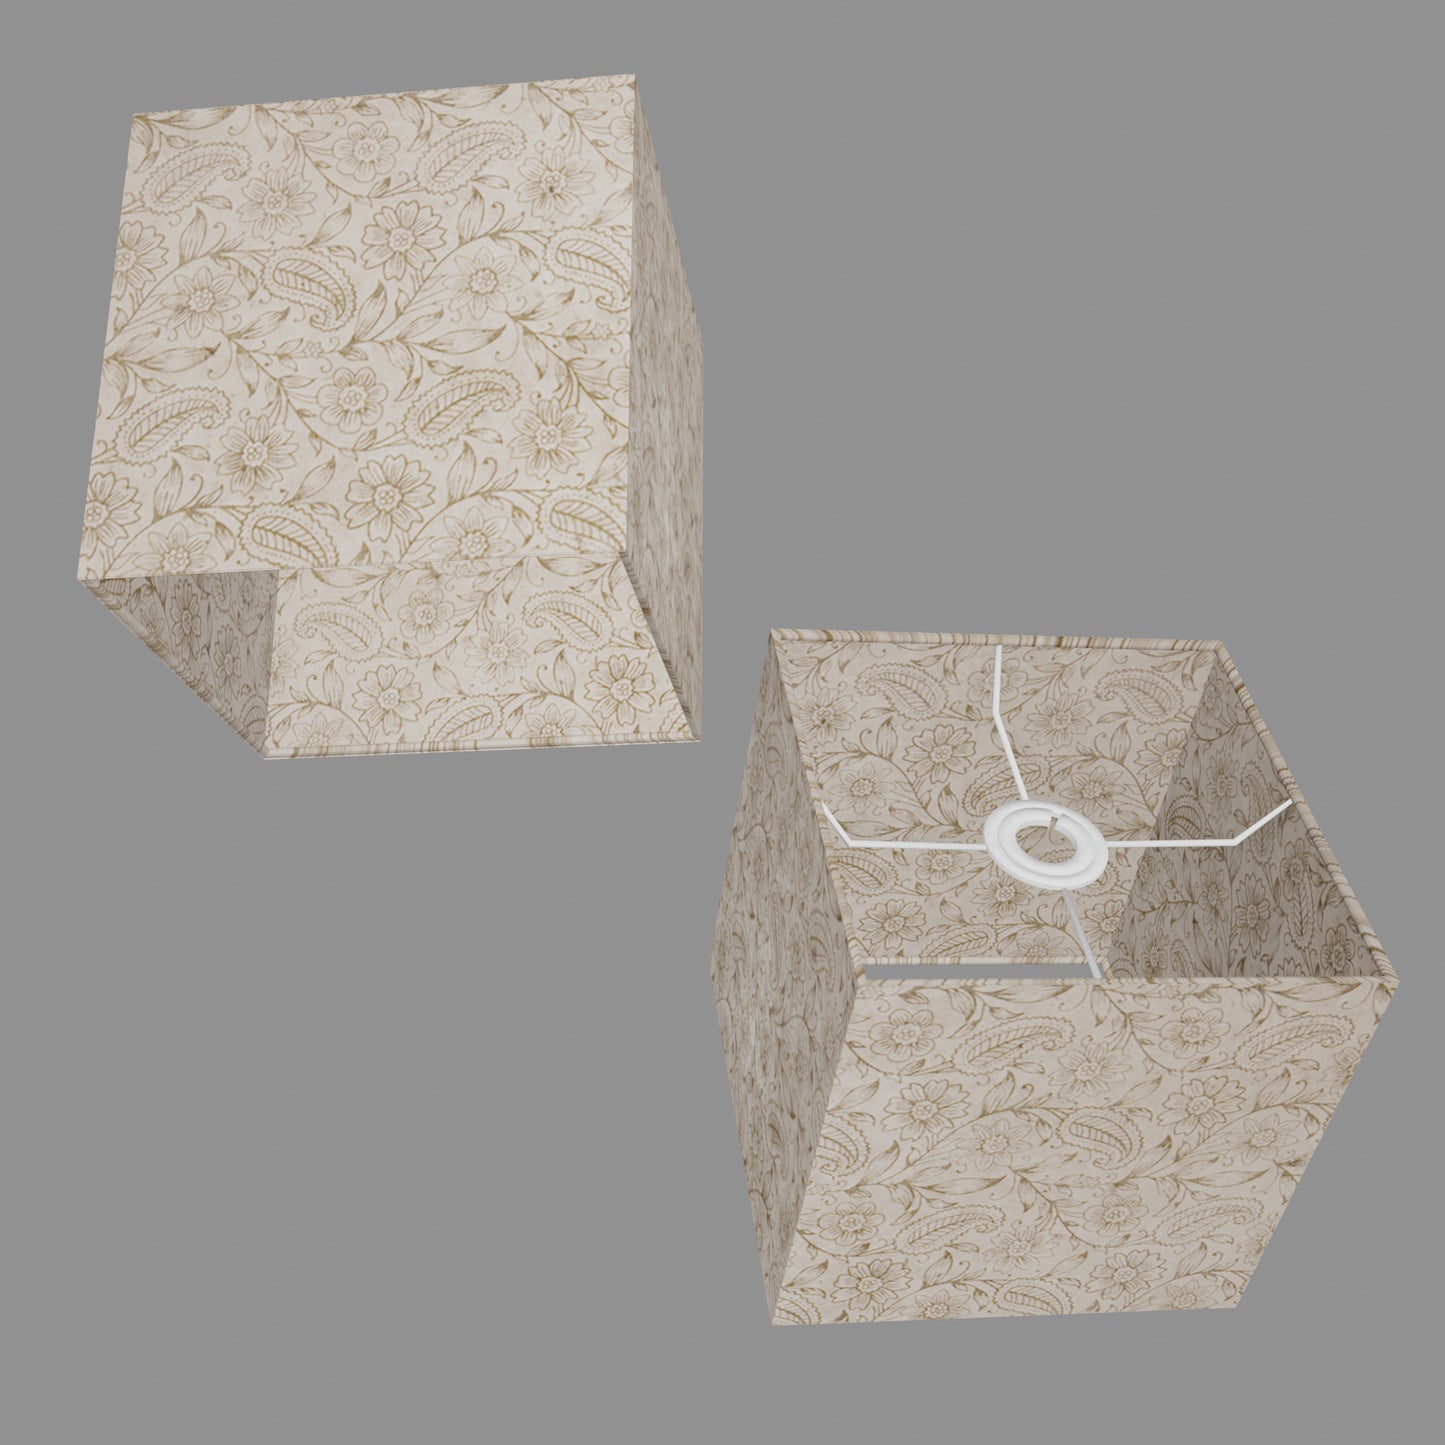 Square Lamp Shade - P69 - Garden Gold on Natural, 20cm(w) x 20cm(h) x 20cm(d)